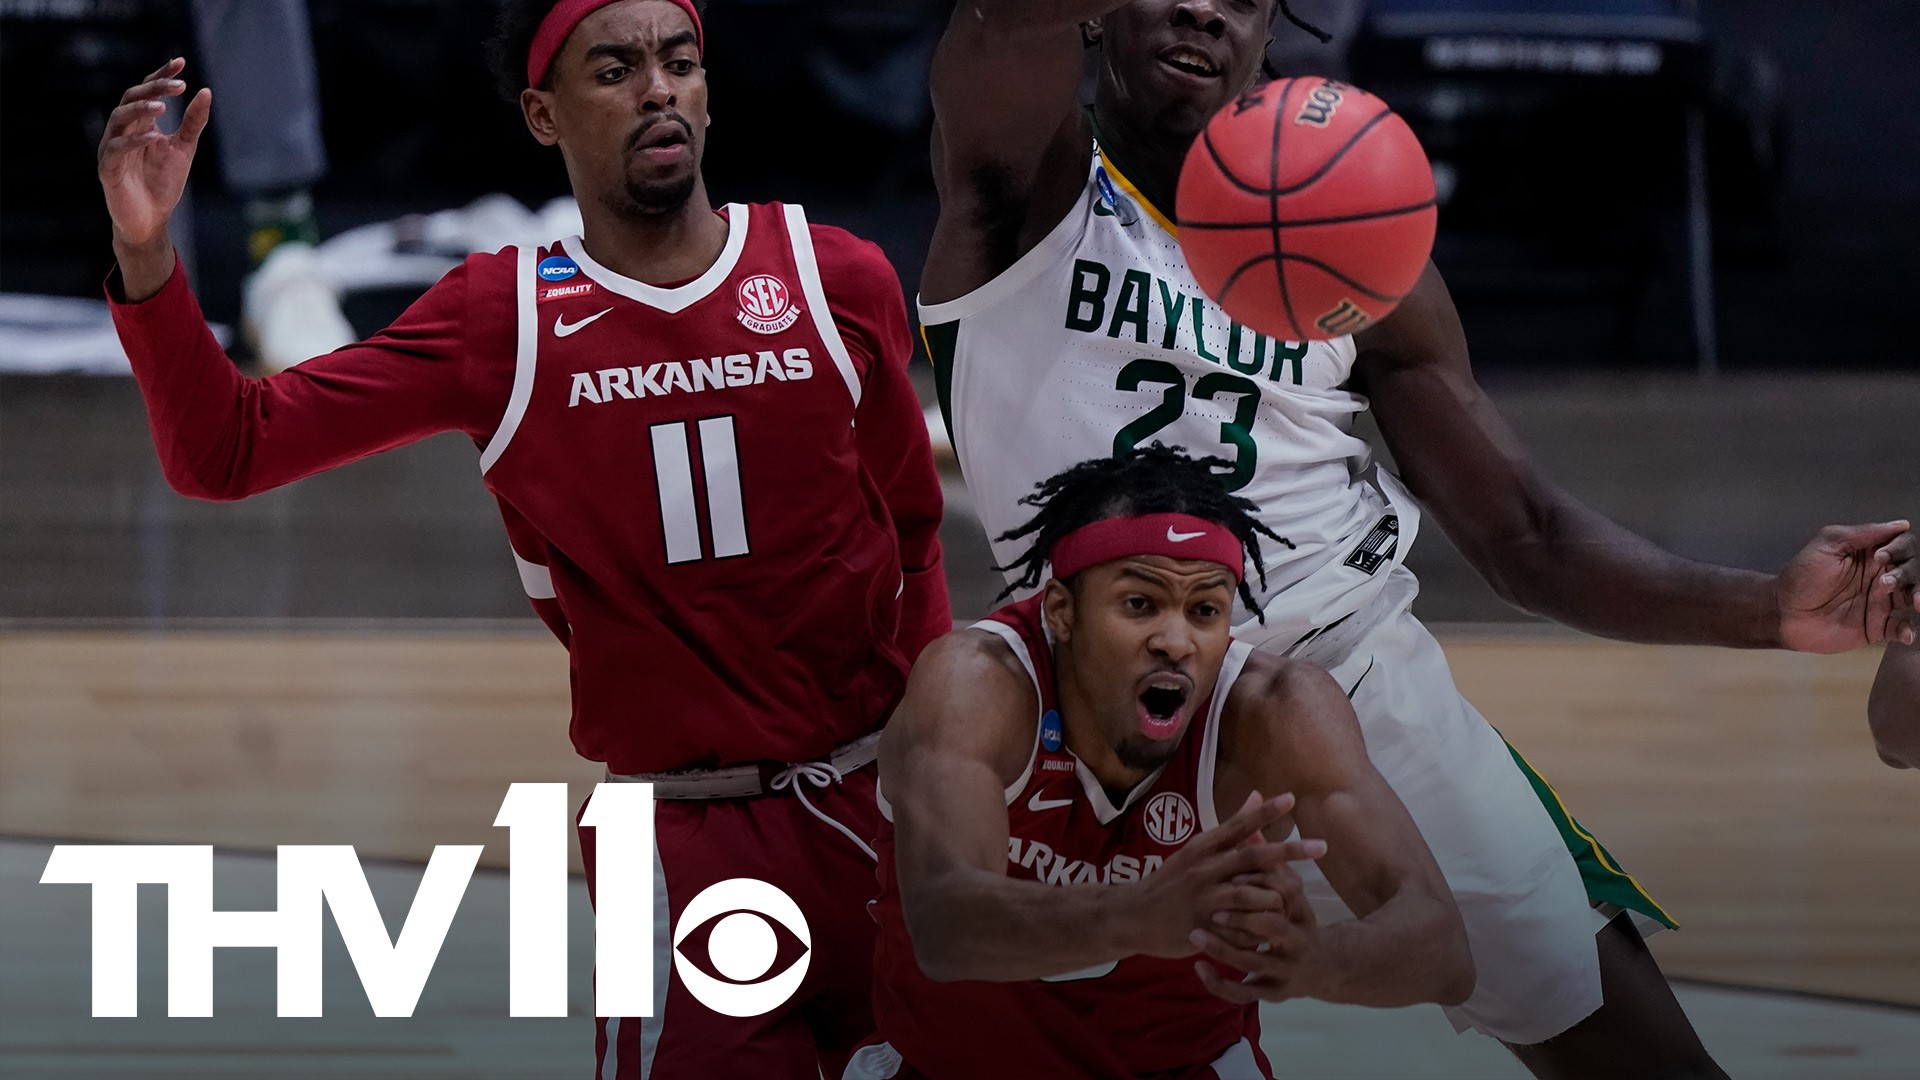 The Razorbacks had plenty of heart, but came up short against Baylor in the NCAA Men's basketball tournament. WPS forever!